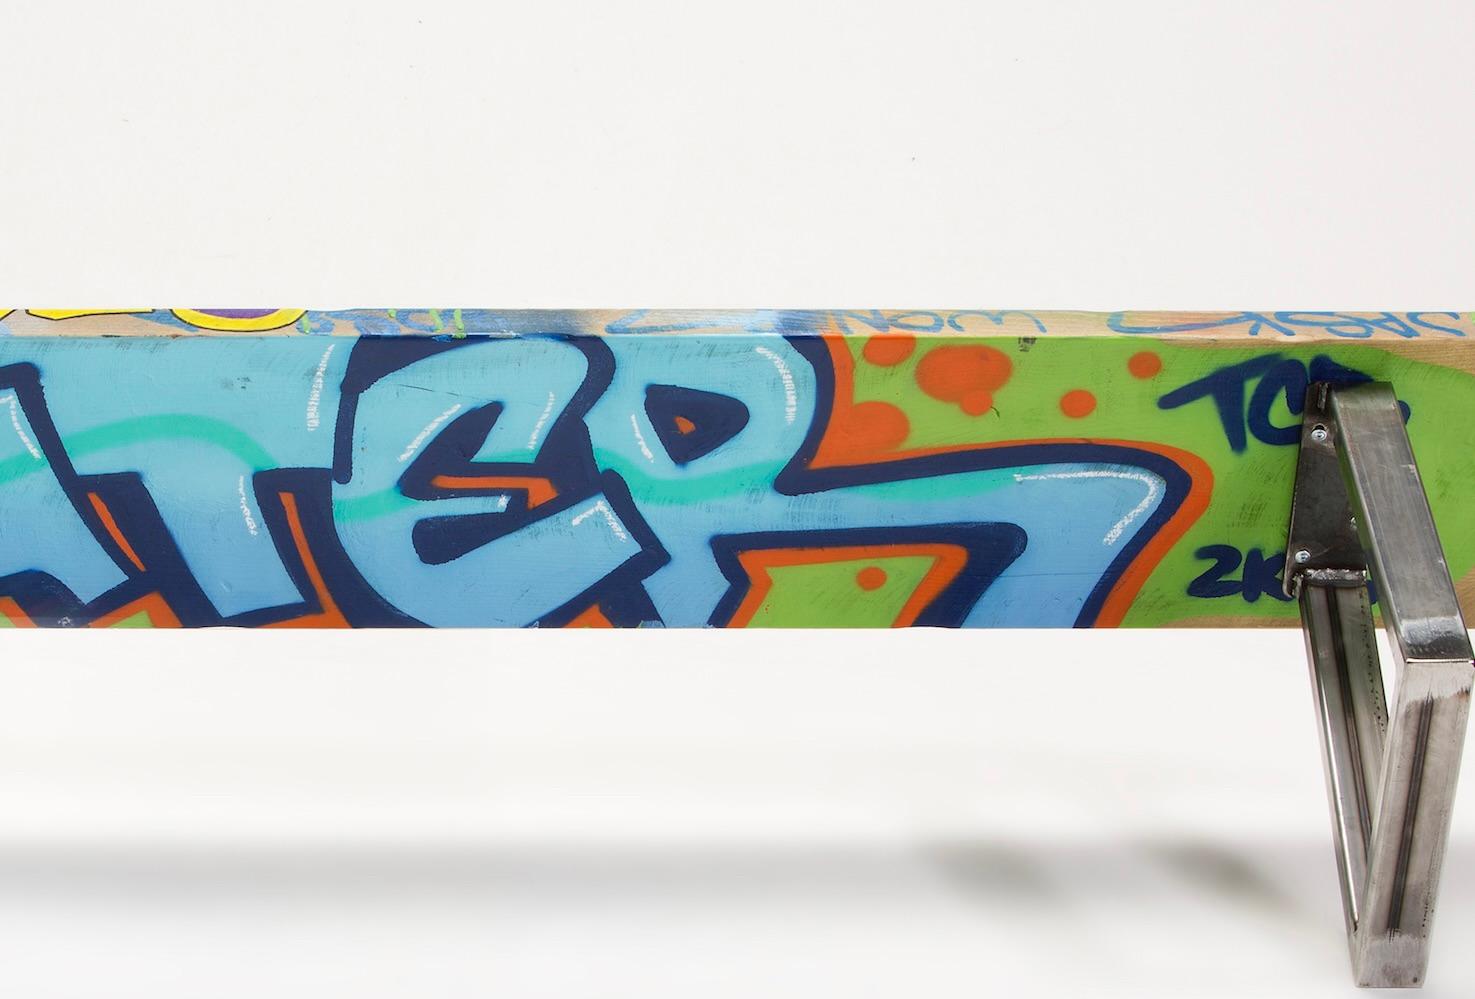 „Rase Alley“ Große farbenfrohe Graffiti Tagged Holzbank im Angebot 2